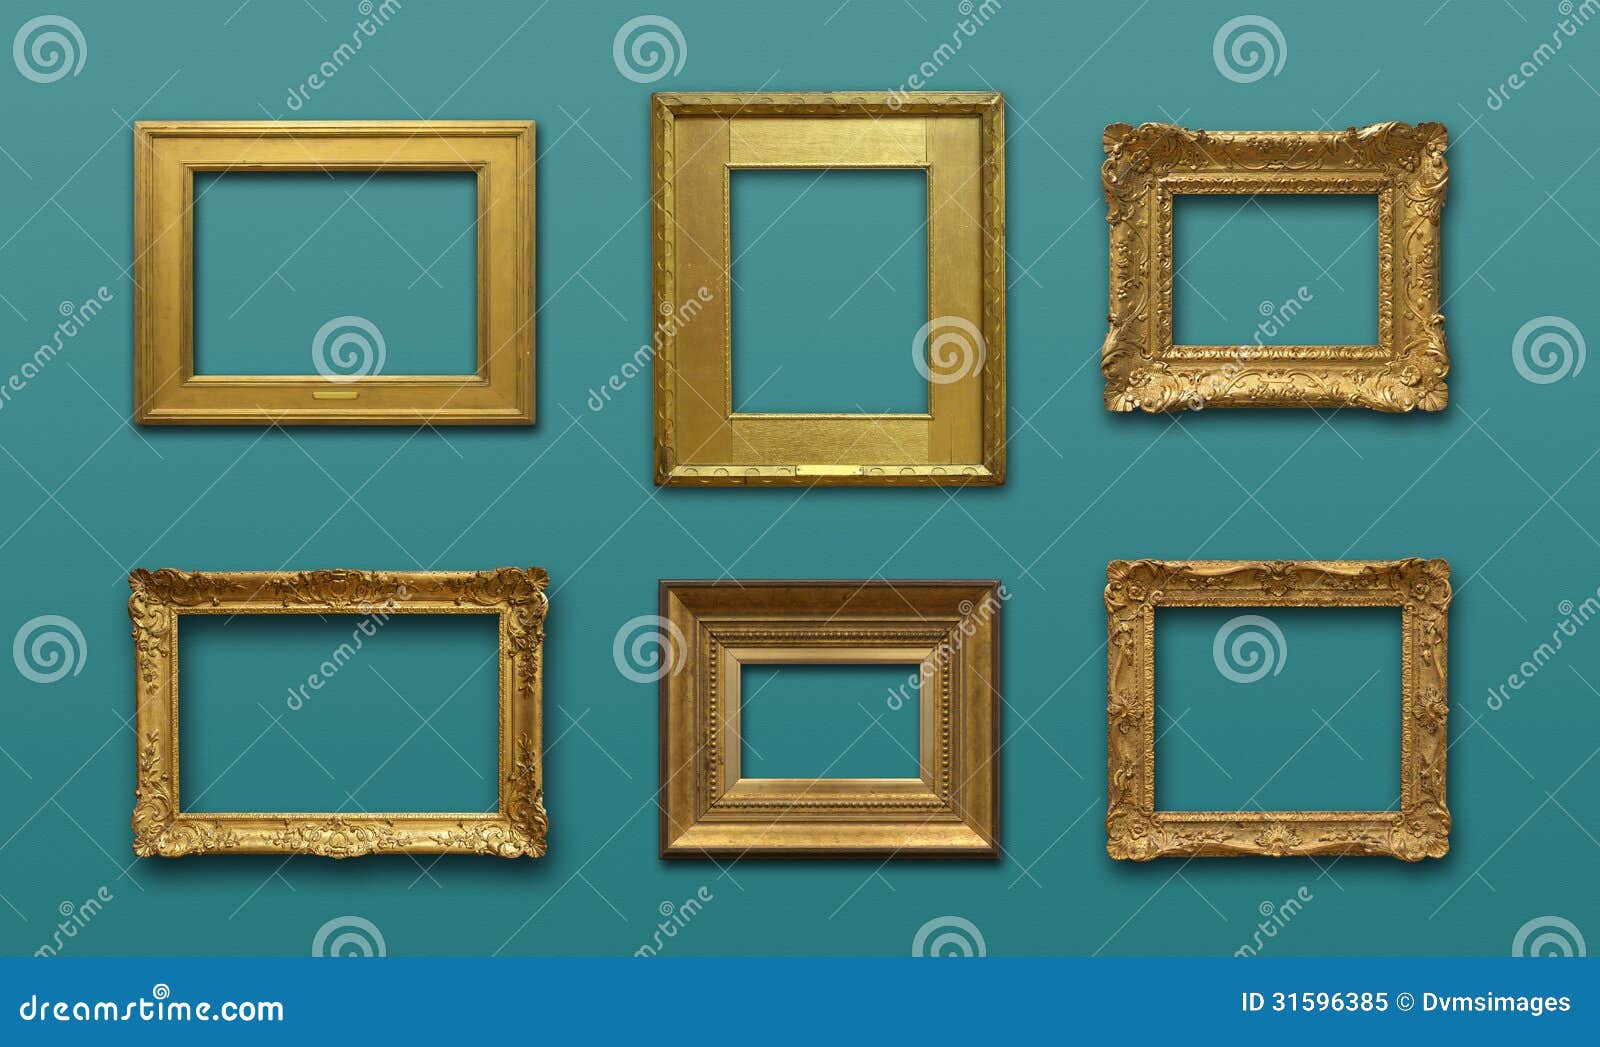 gallery wall with gold frames